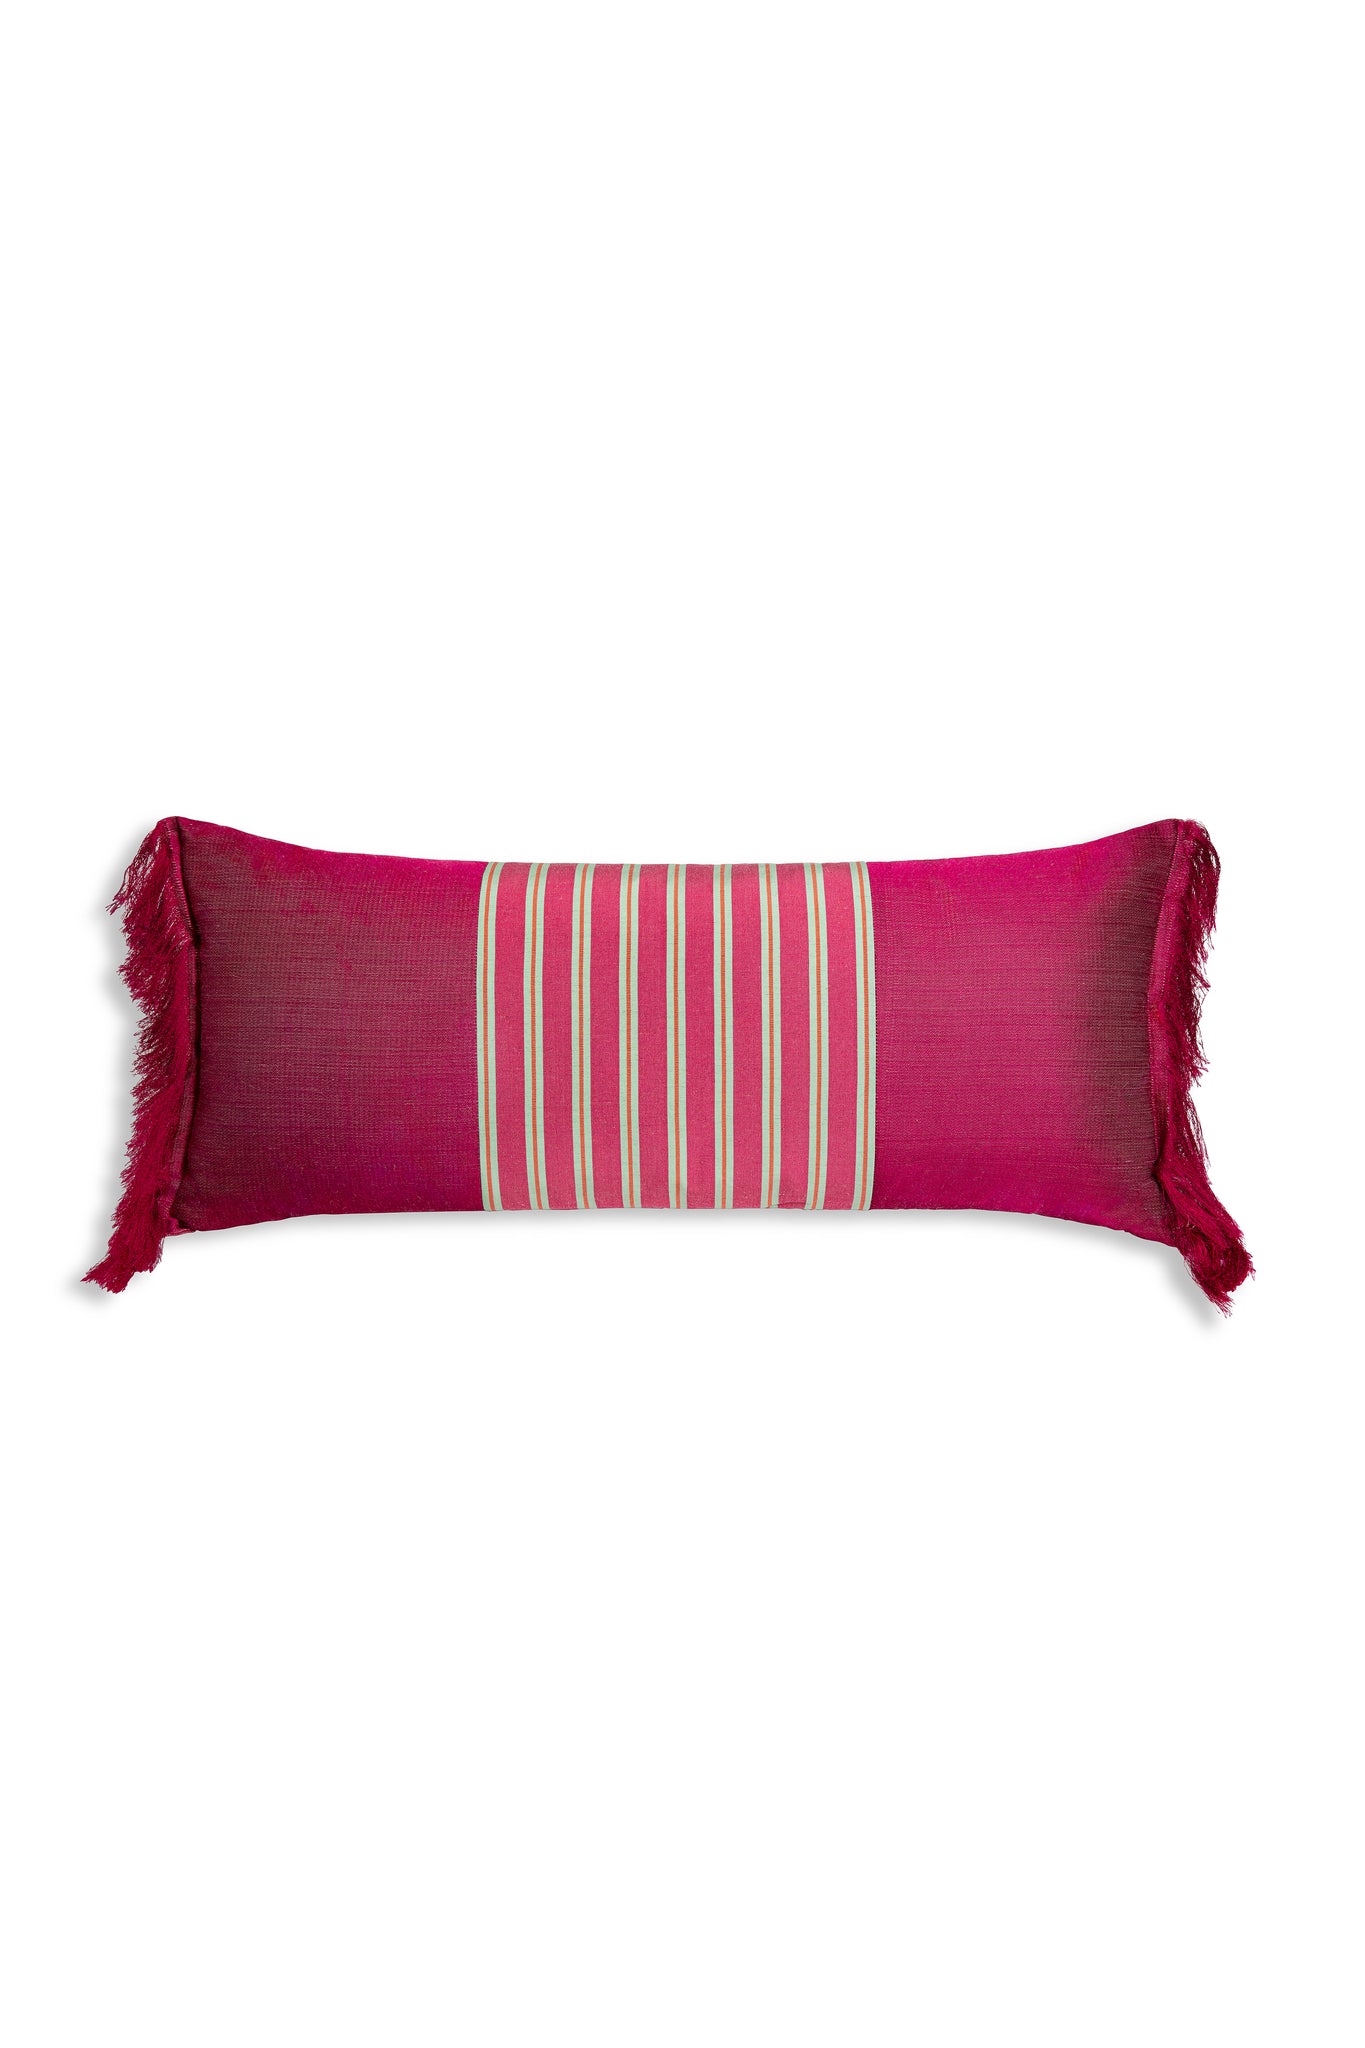 Pink Fringed Pillow